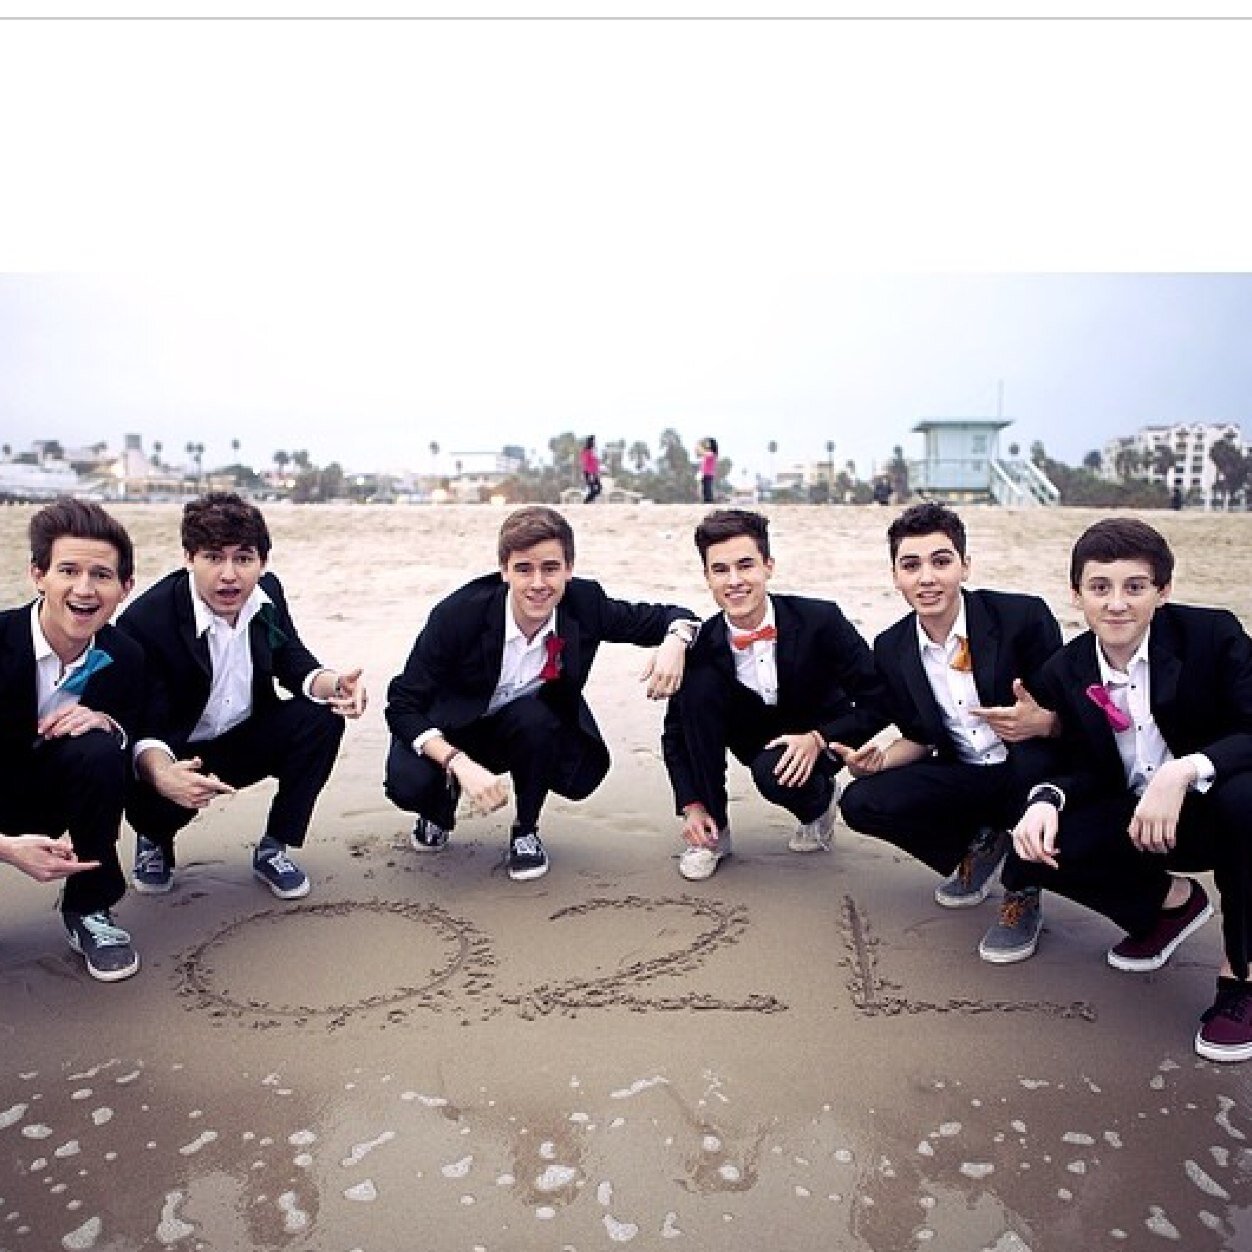 Hey i love O2L and youtuber's